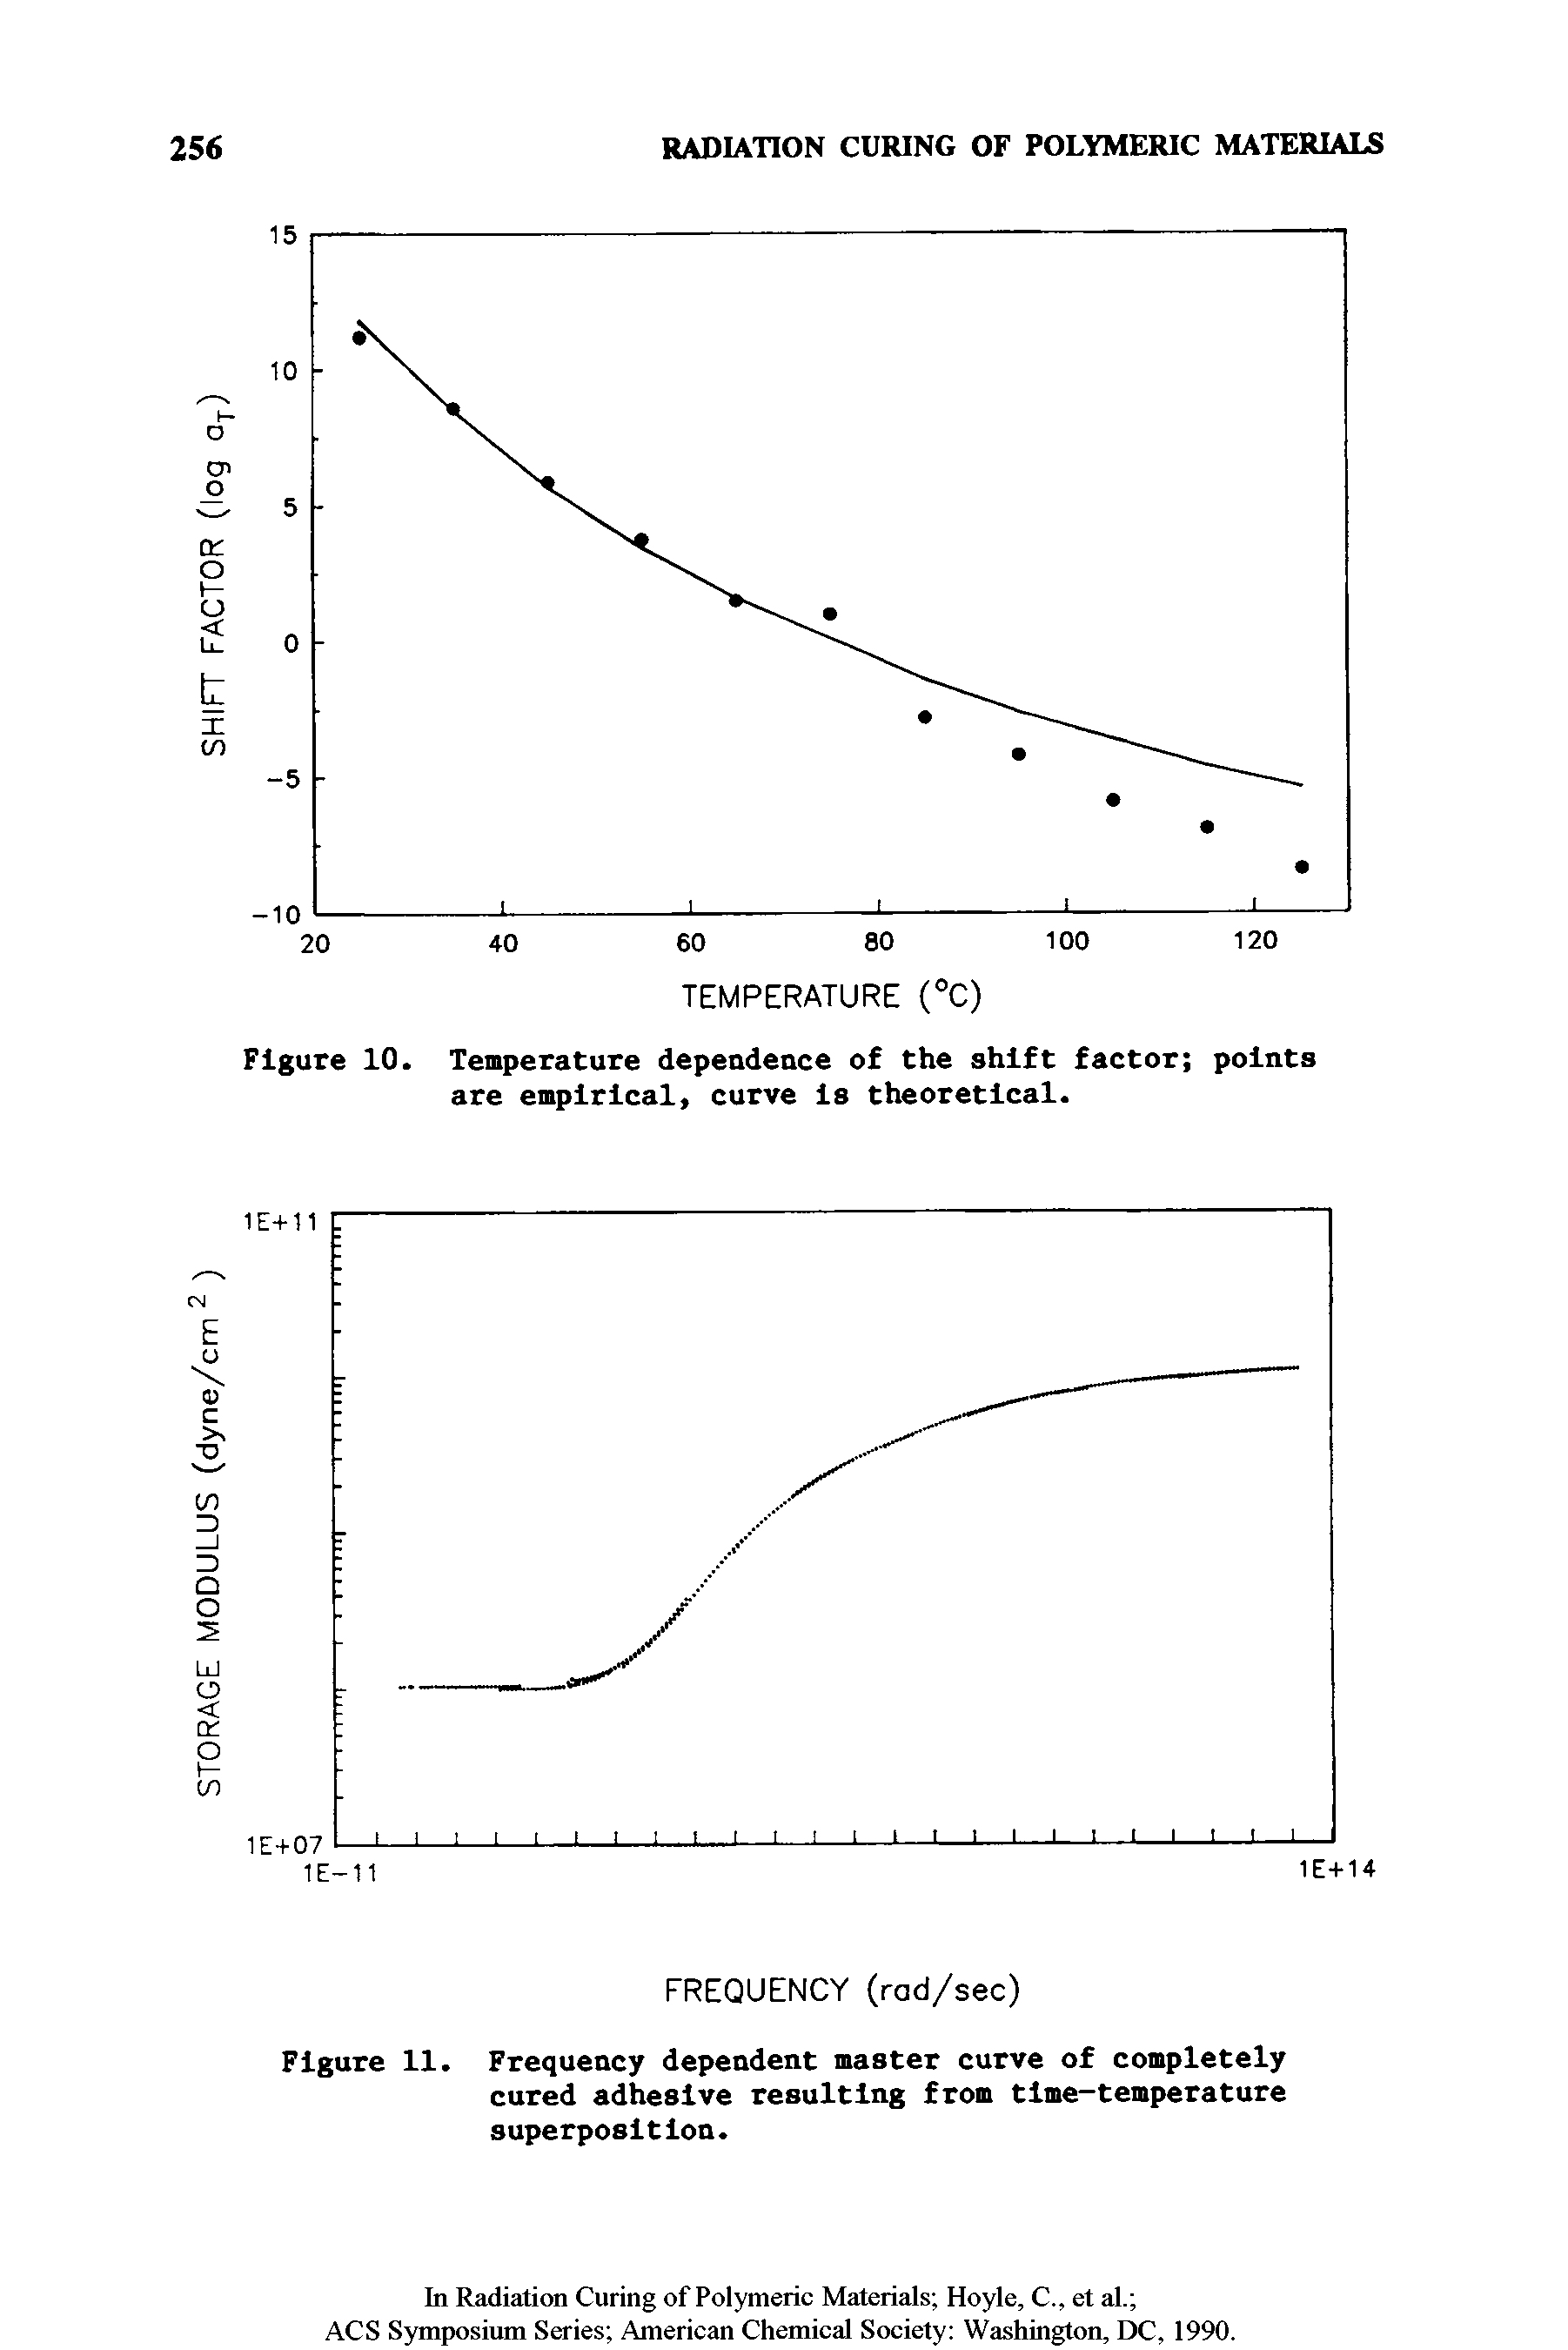 Figure 11. Frequency dependent master curve of completely cured adhesive resulting from time-temperature superposition.